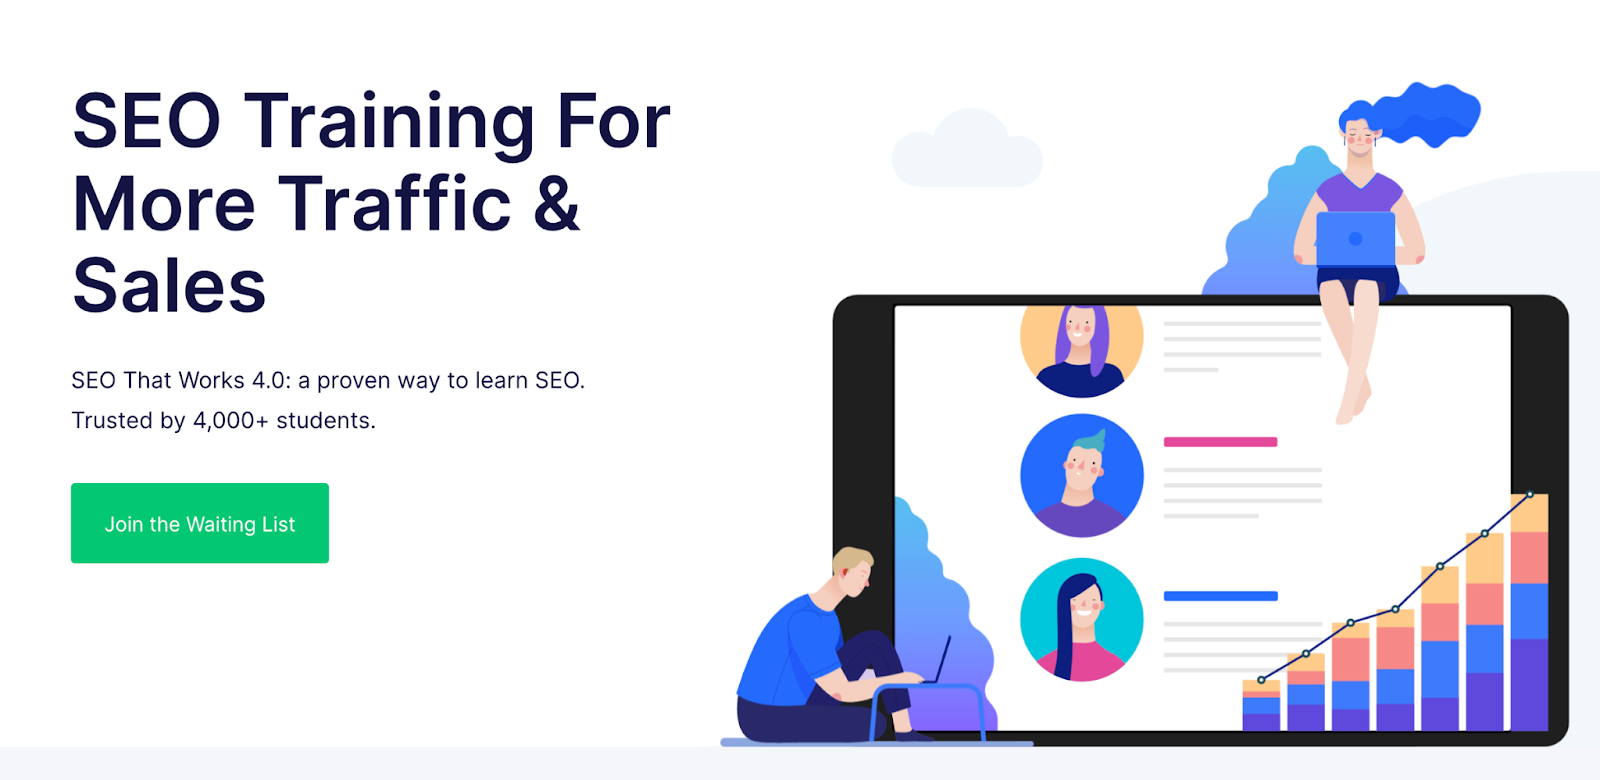 Backlinko SEO Training for More Traffic & Sales course